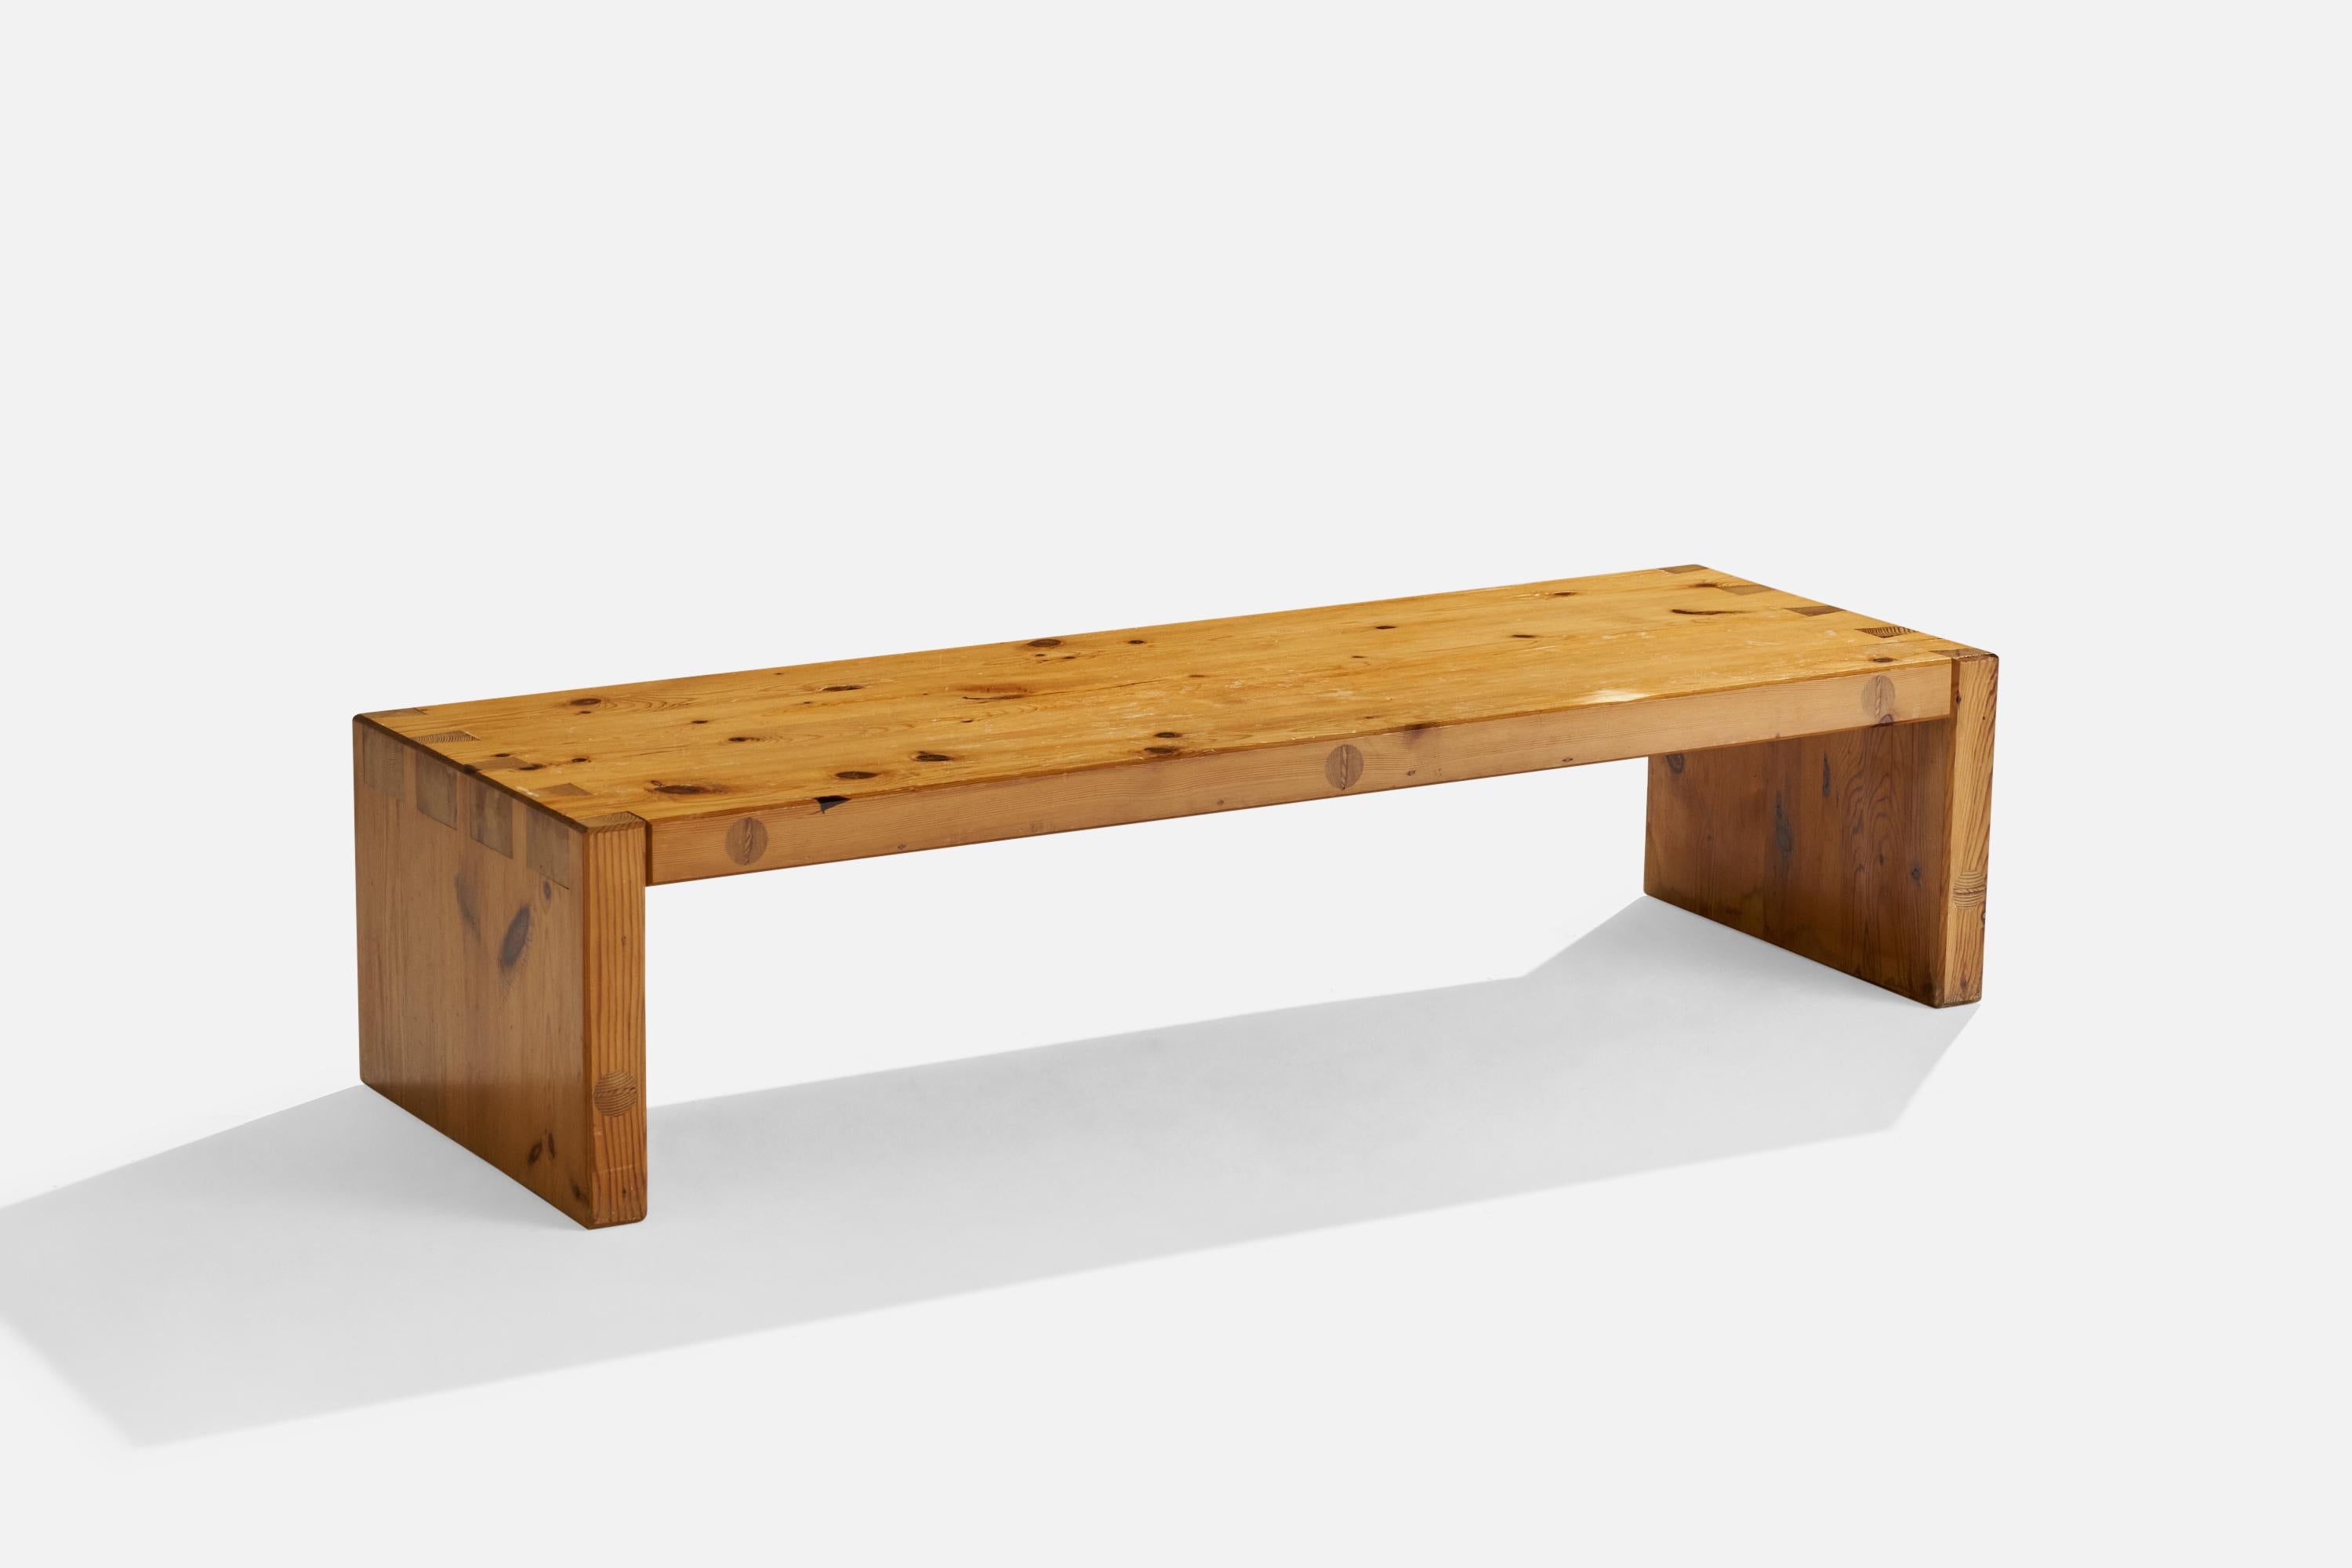 A pine bench or coffee table model 